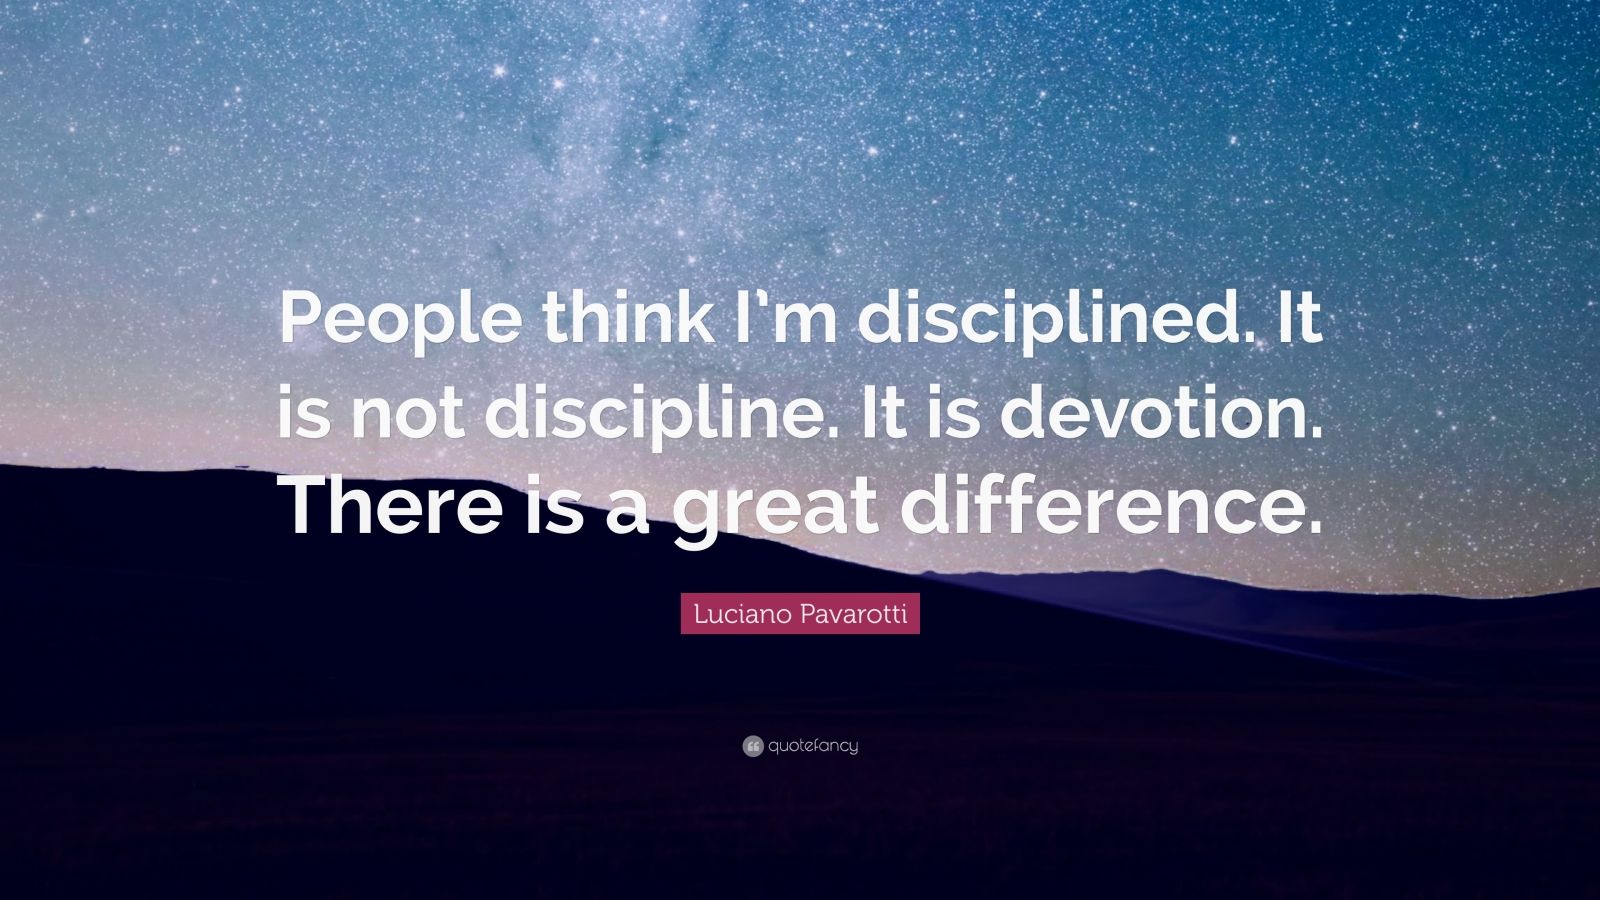 Luciano Pavarotti Quote: “People think I’m disciplined. It is not ...